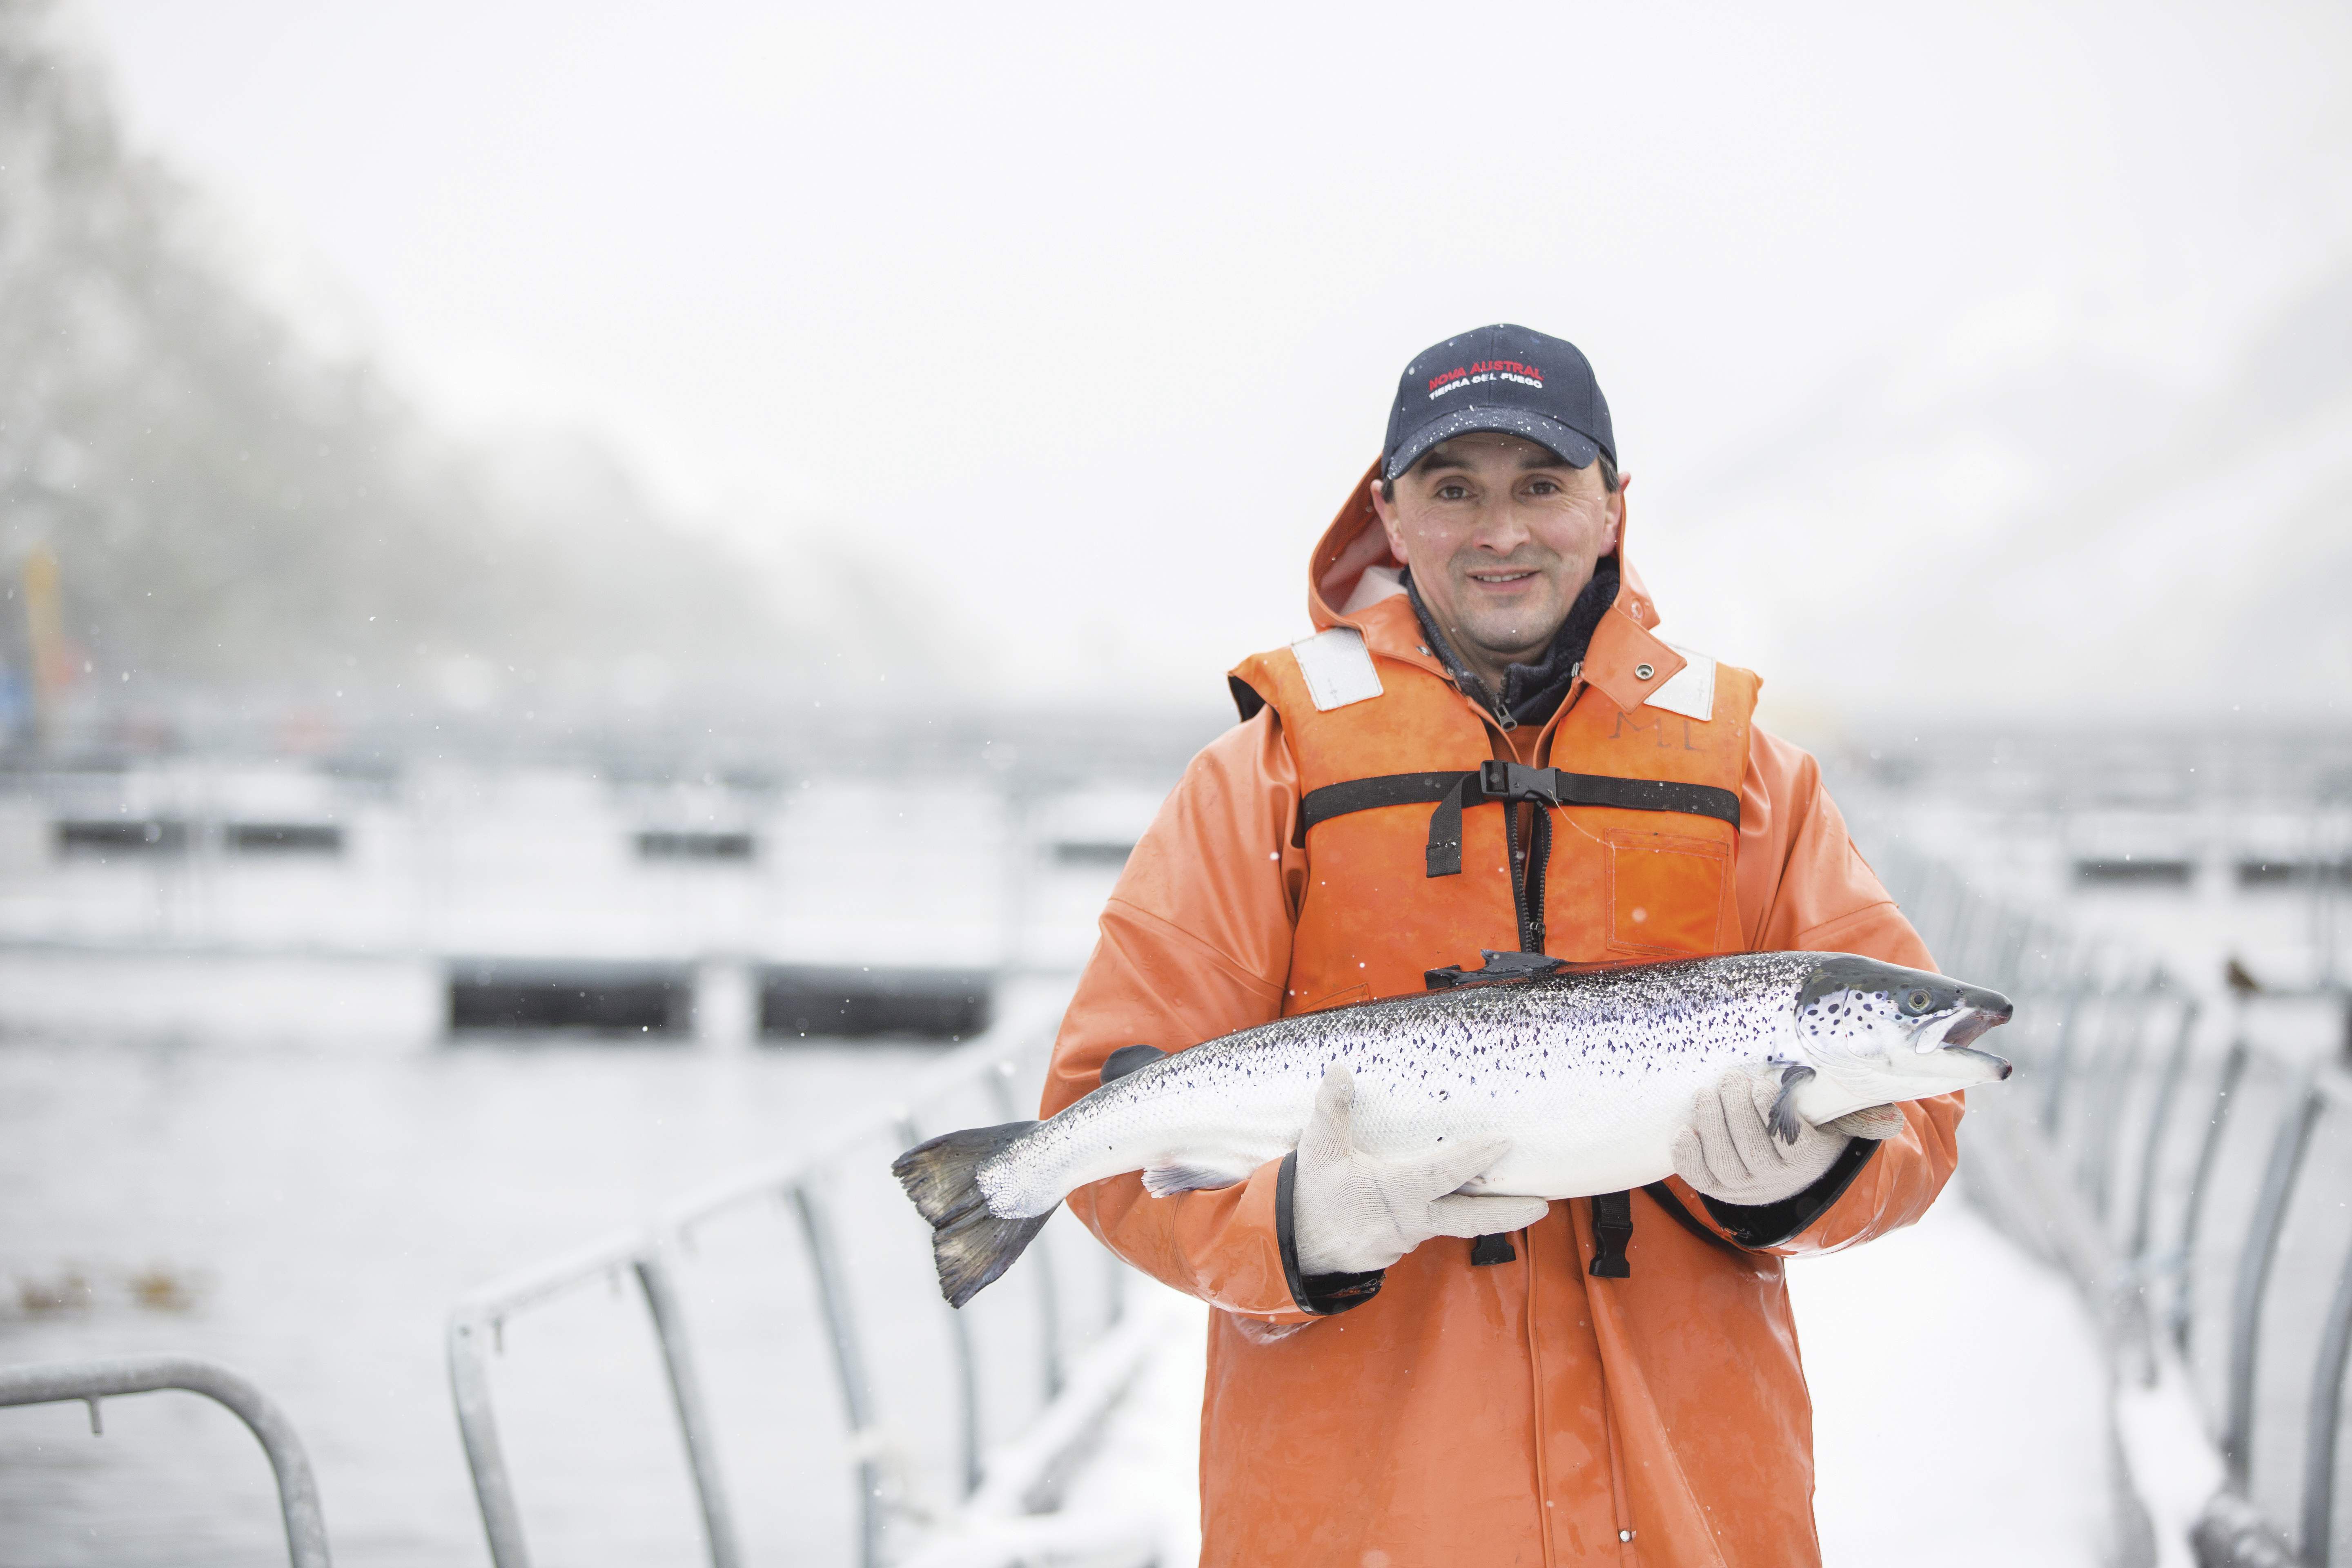 Clearwater's Sixty South Salmon aims to change the world with its